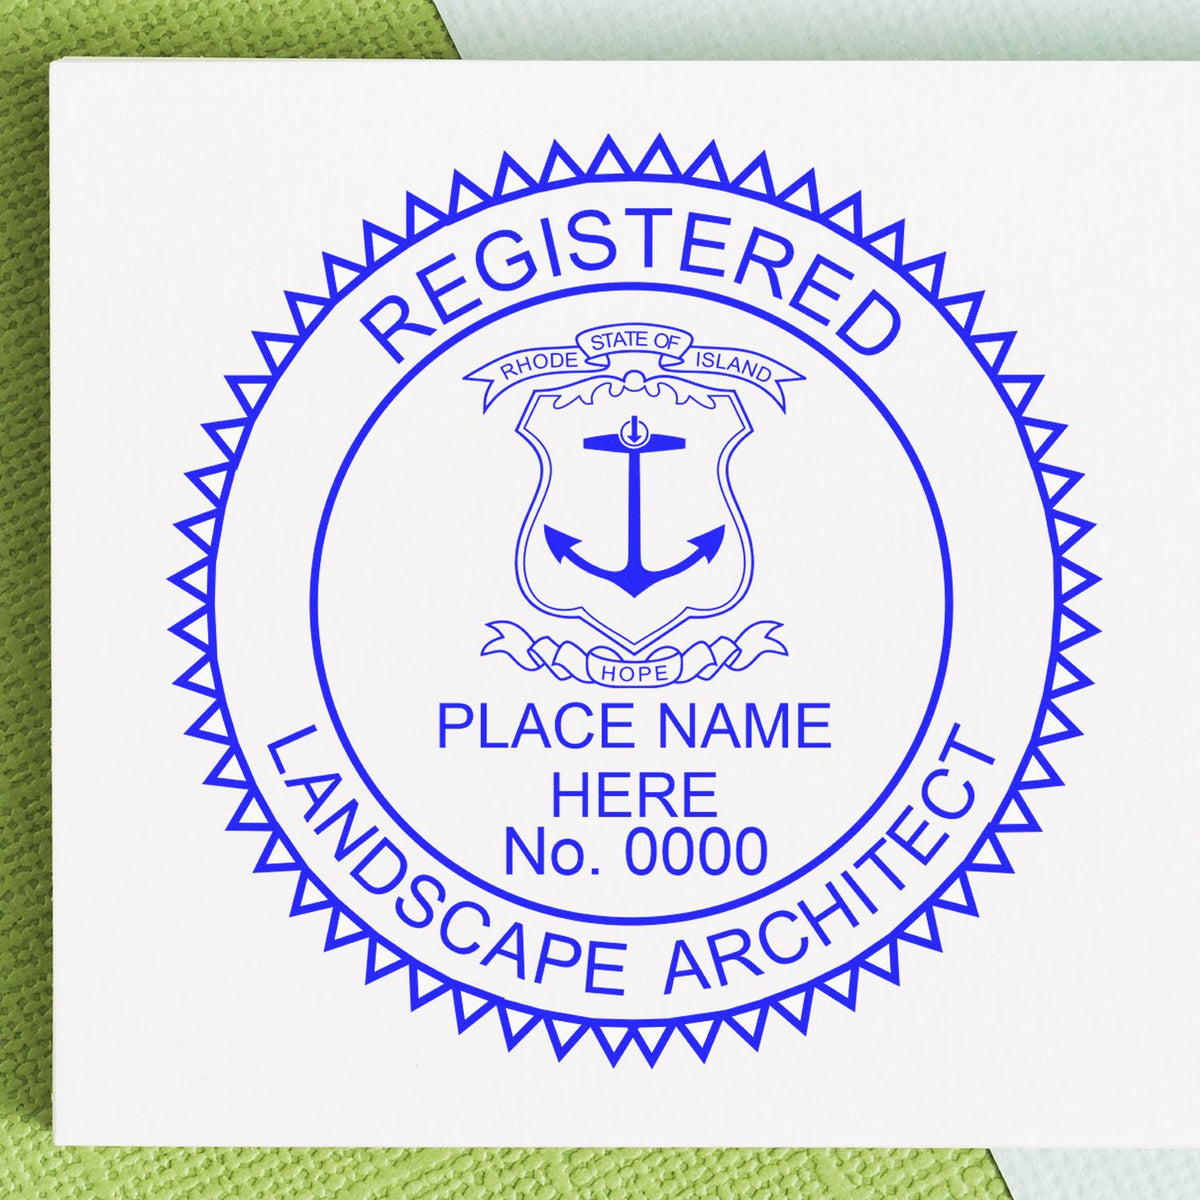 The Slim Pre-Inked Rhode Island Landscape Architect Seal Stamp stamp impression comes to life with a crisp, detailed photo on paper - showcasing true professional quality.